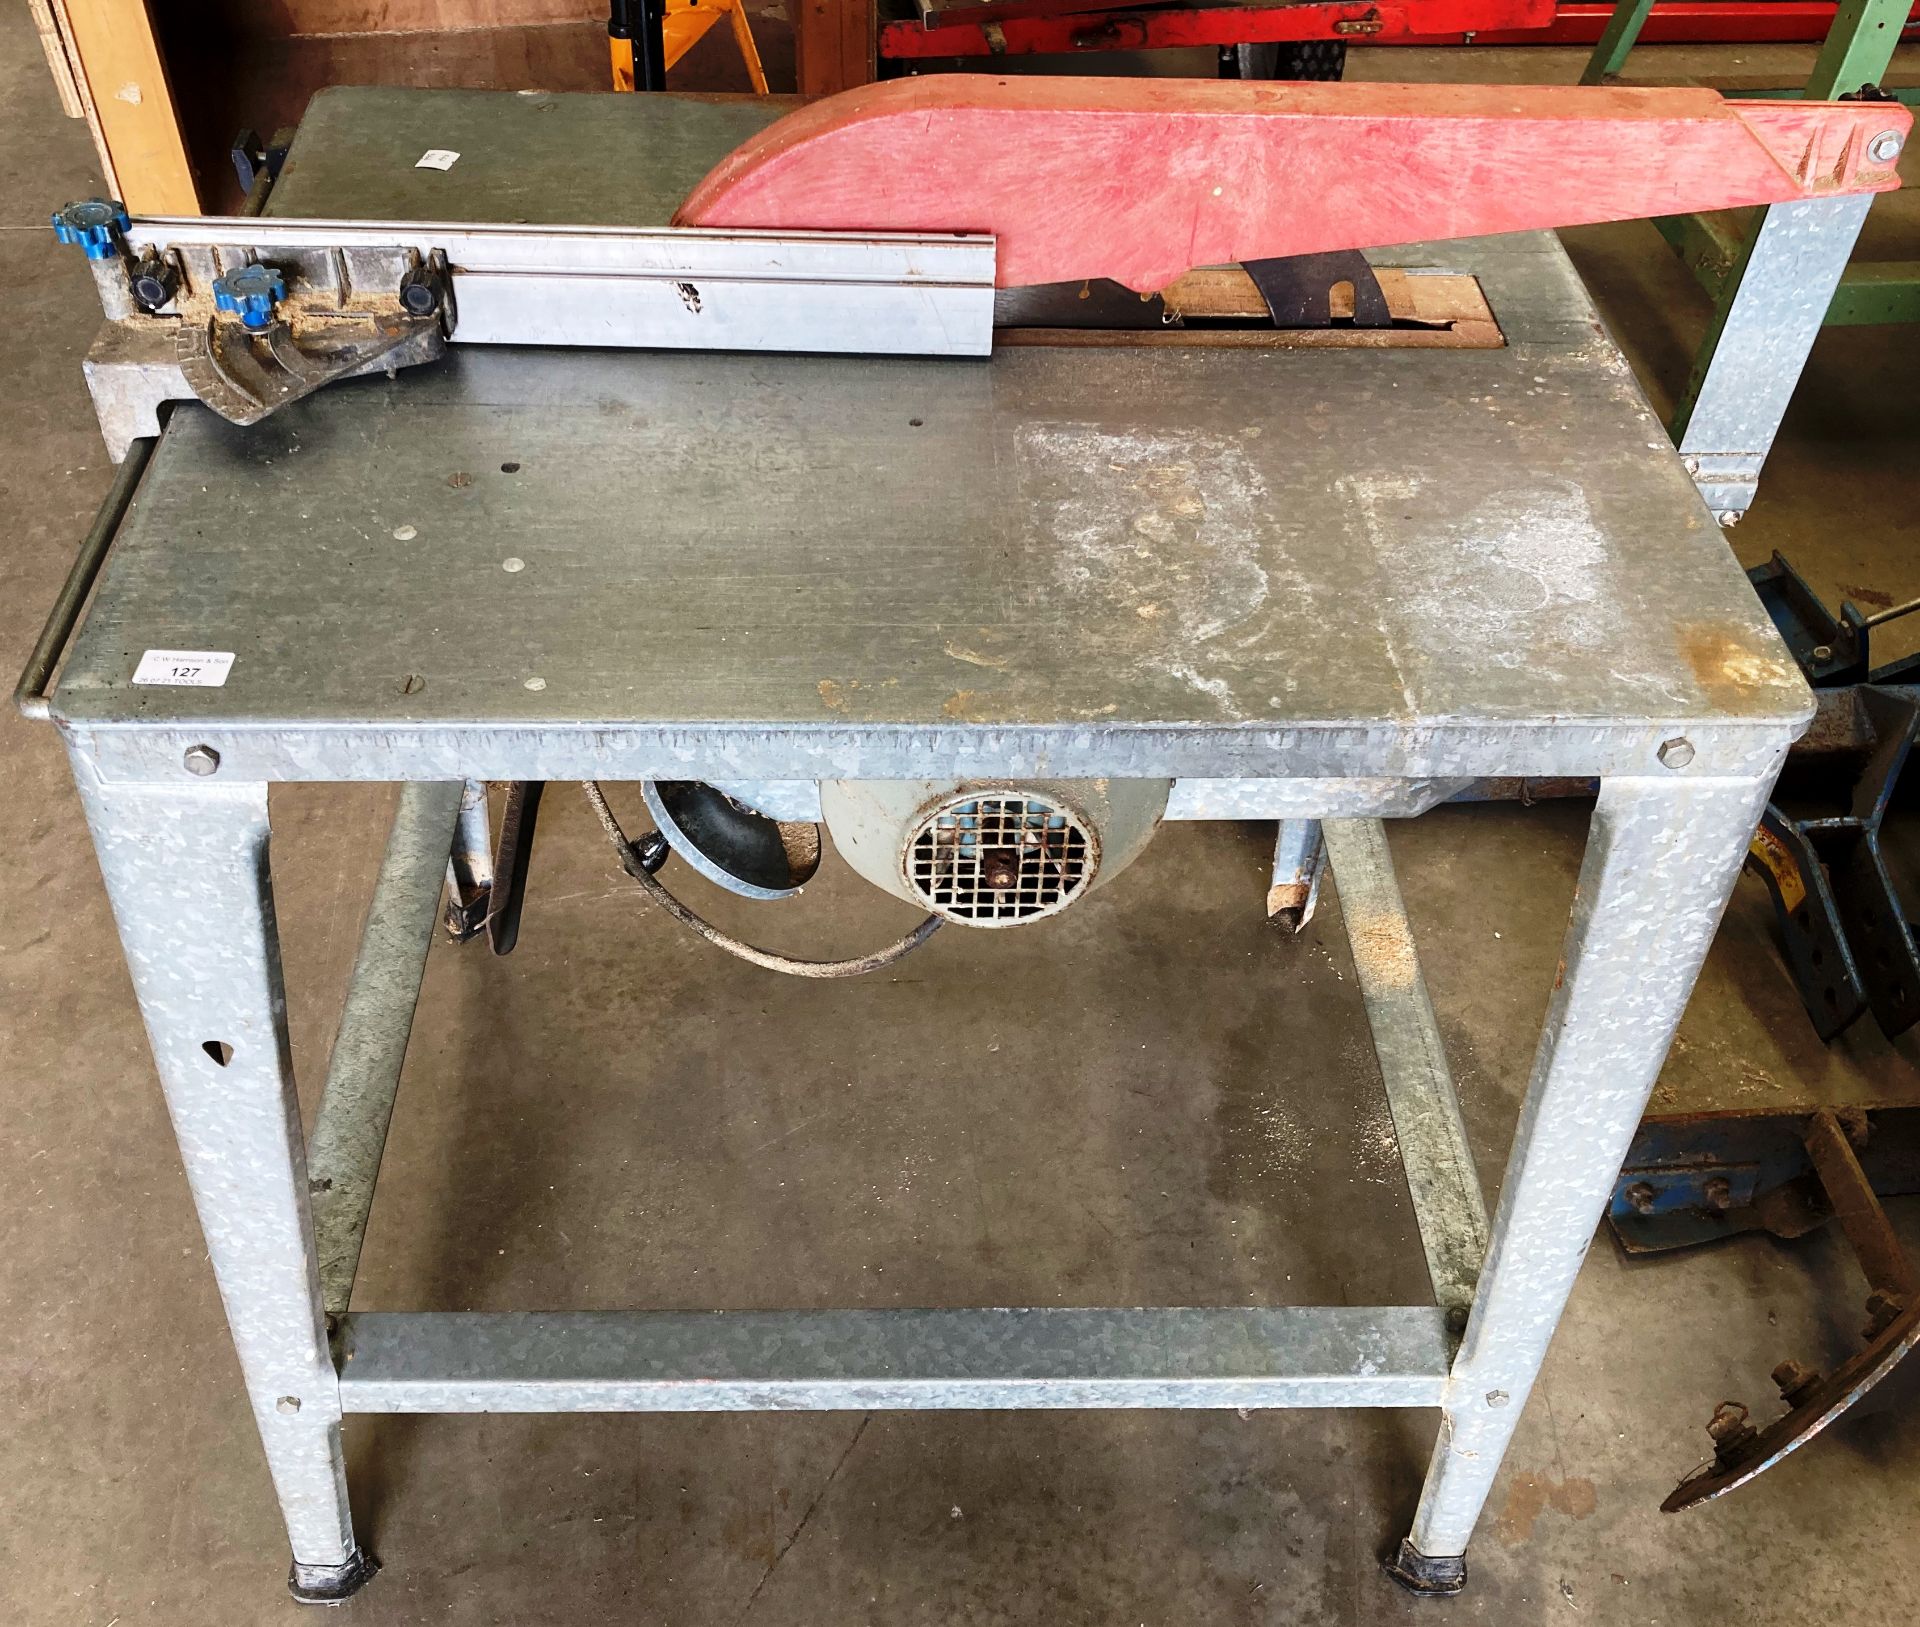 A 3 phase circular saw bench on galvanised table - no lead